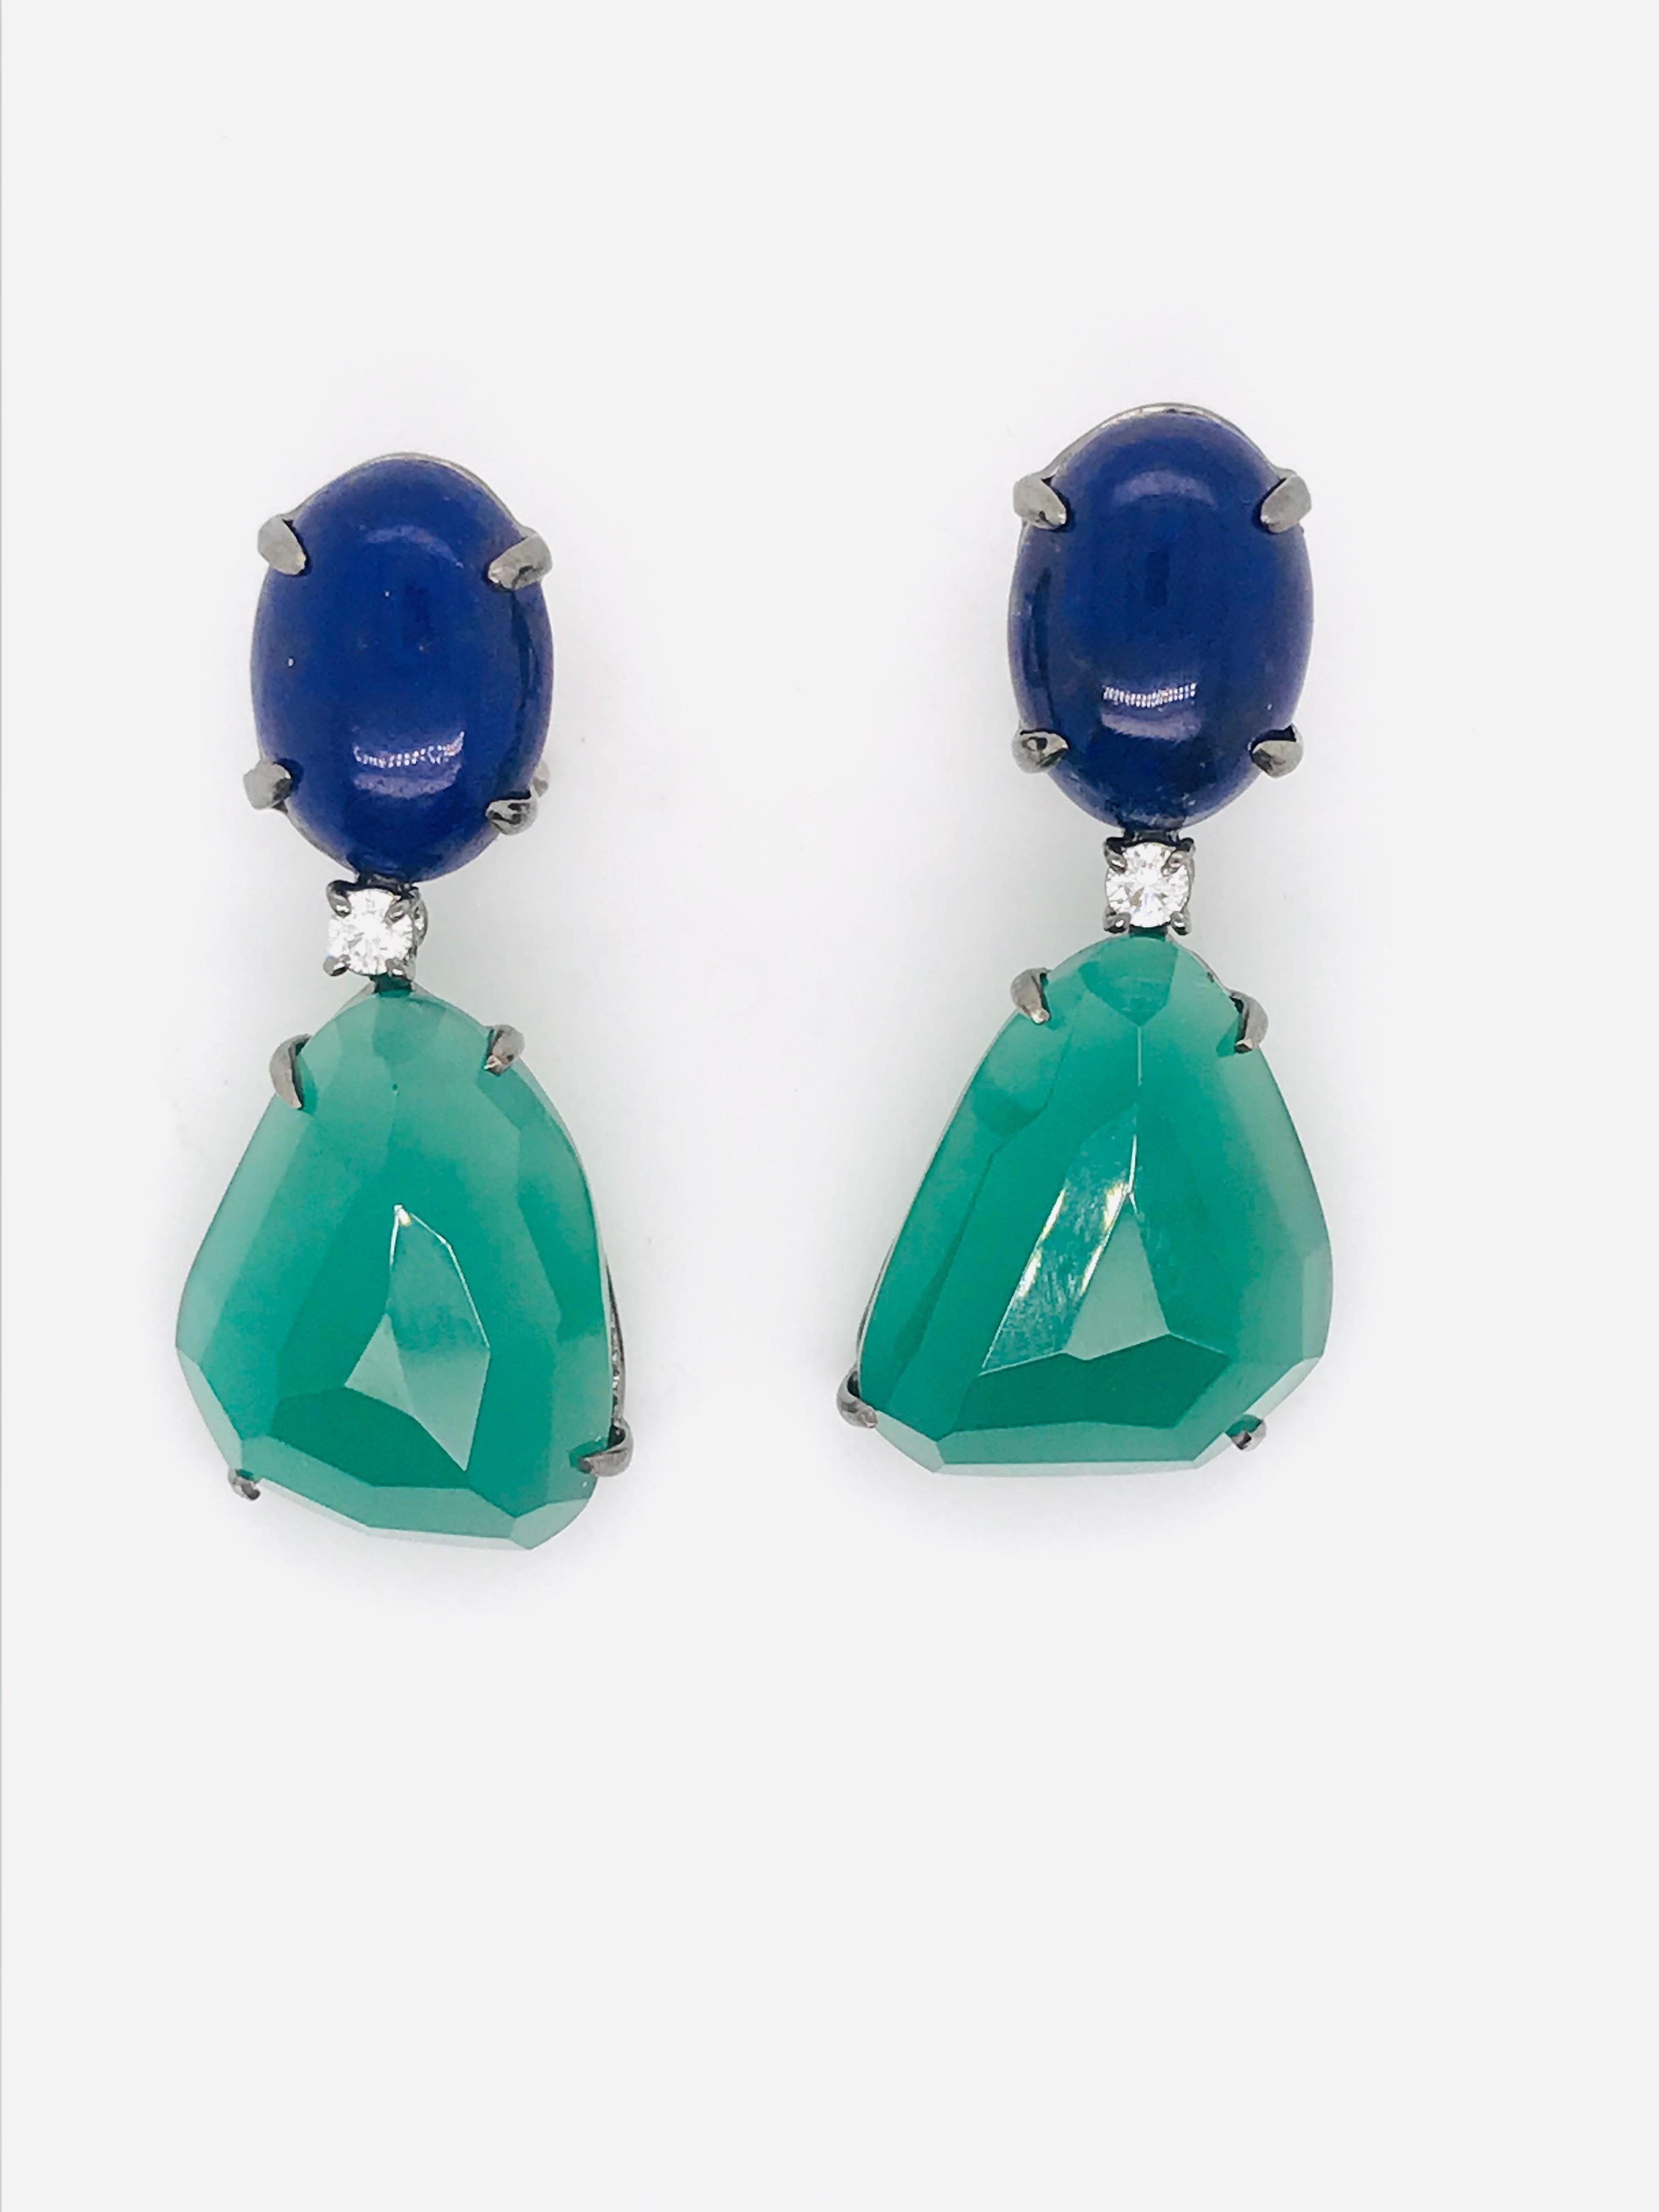 Lapis Lazuli and Green Moonstone, Diamonds With Black Gold 18 K Chandelier Earrings
Earrings Lapis Lazuli and Green Moonstone with Diamonds Yellow Gold 18 Carat.
These beautiful earrings will be on your ears the Lustres that move beautifully. 
There